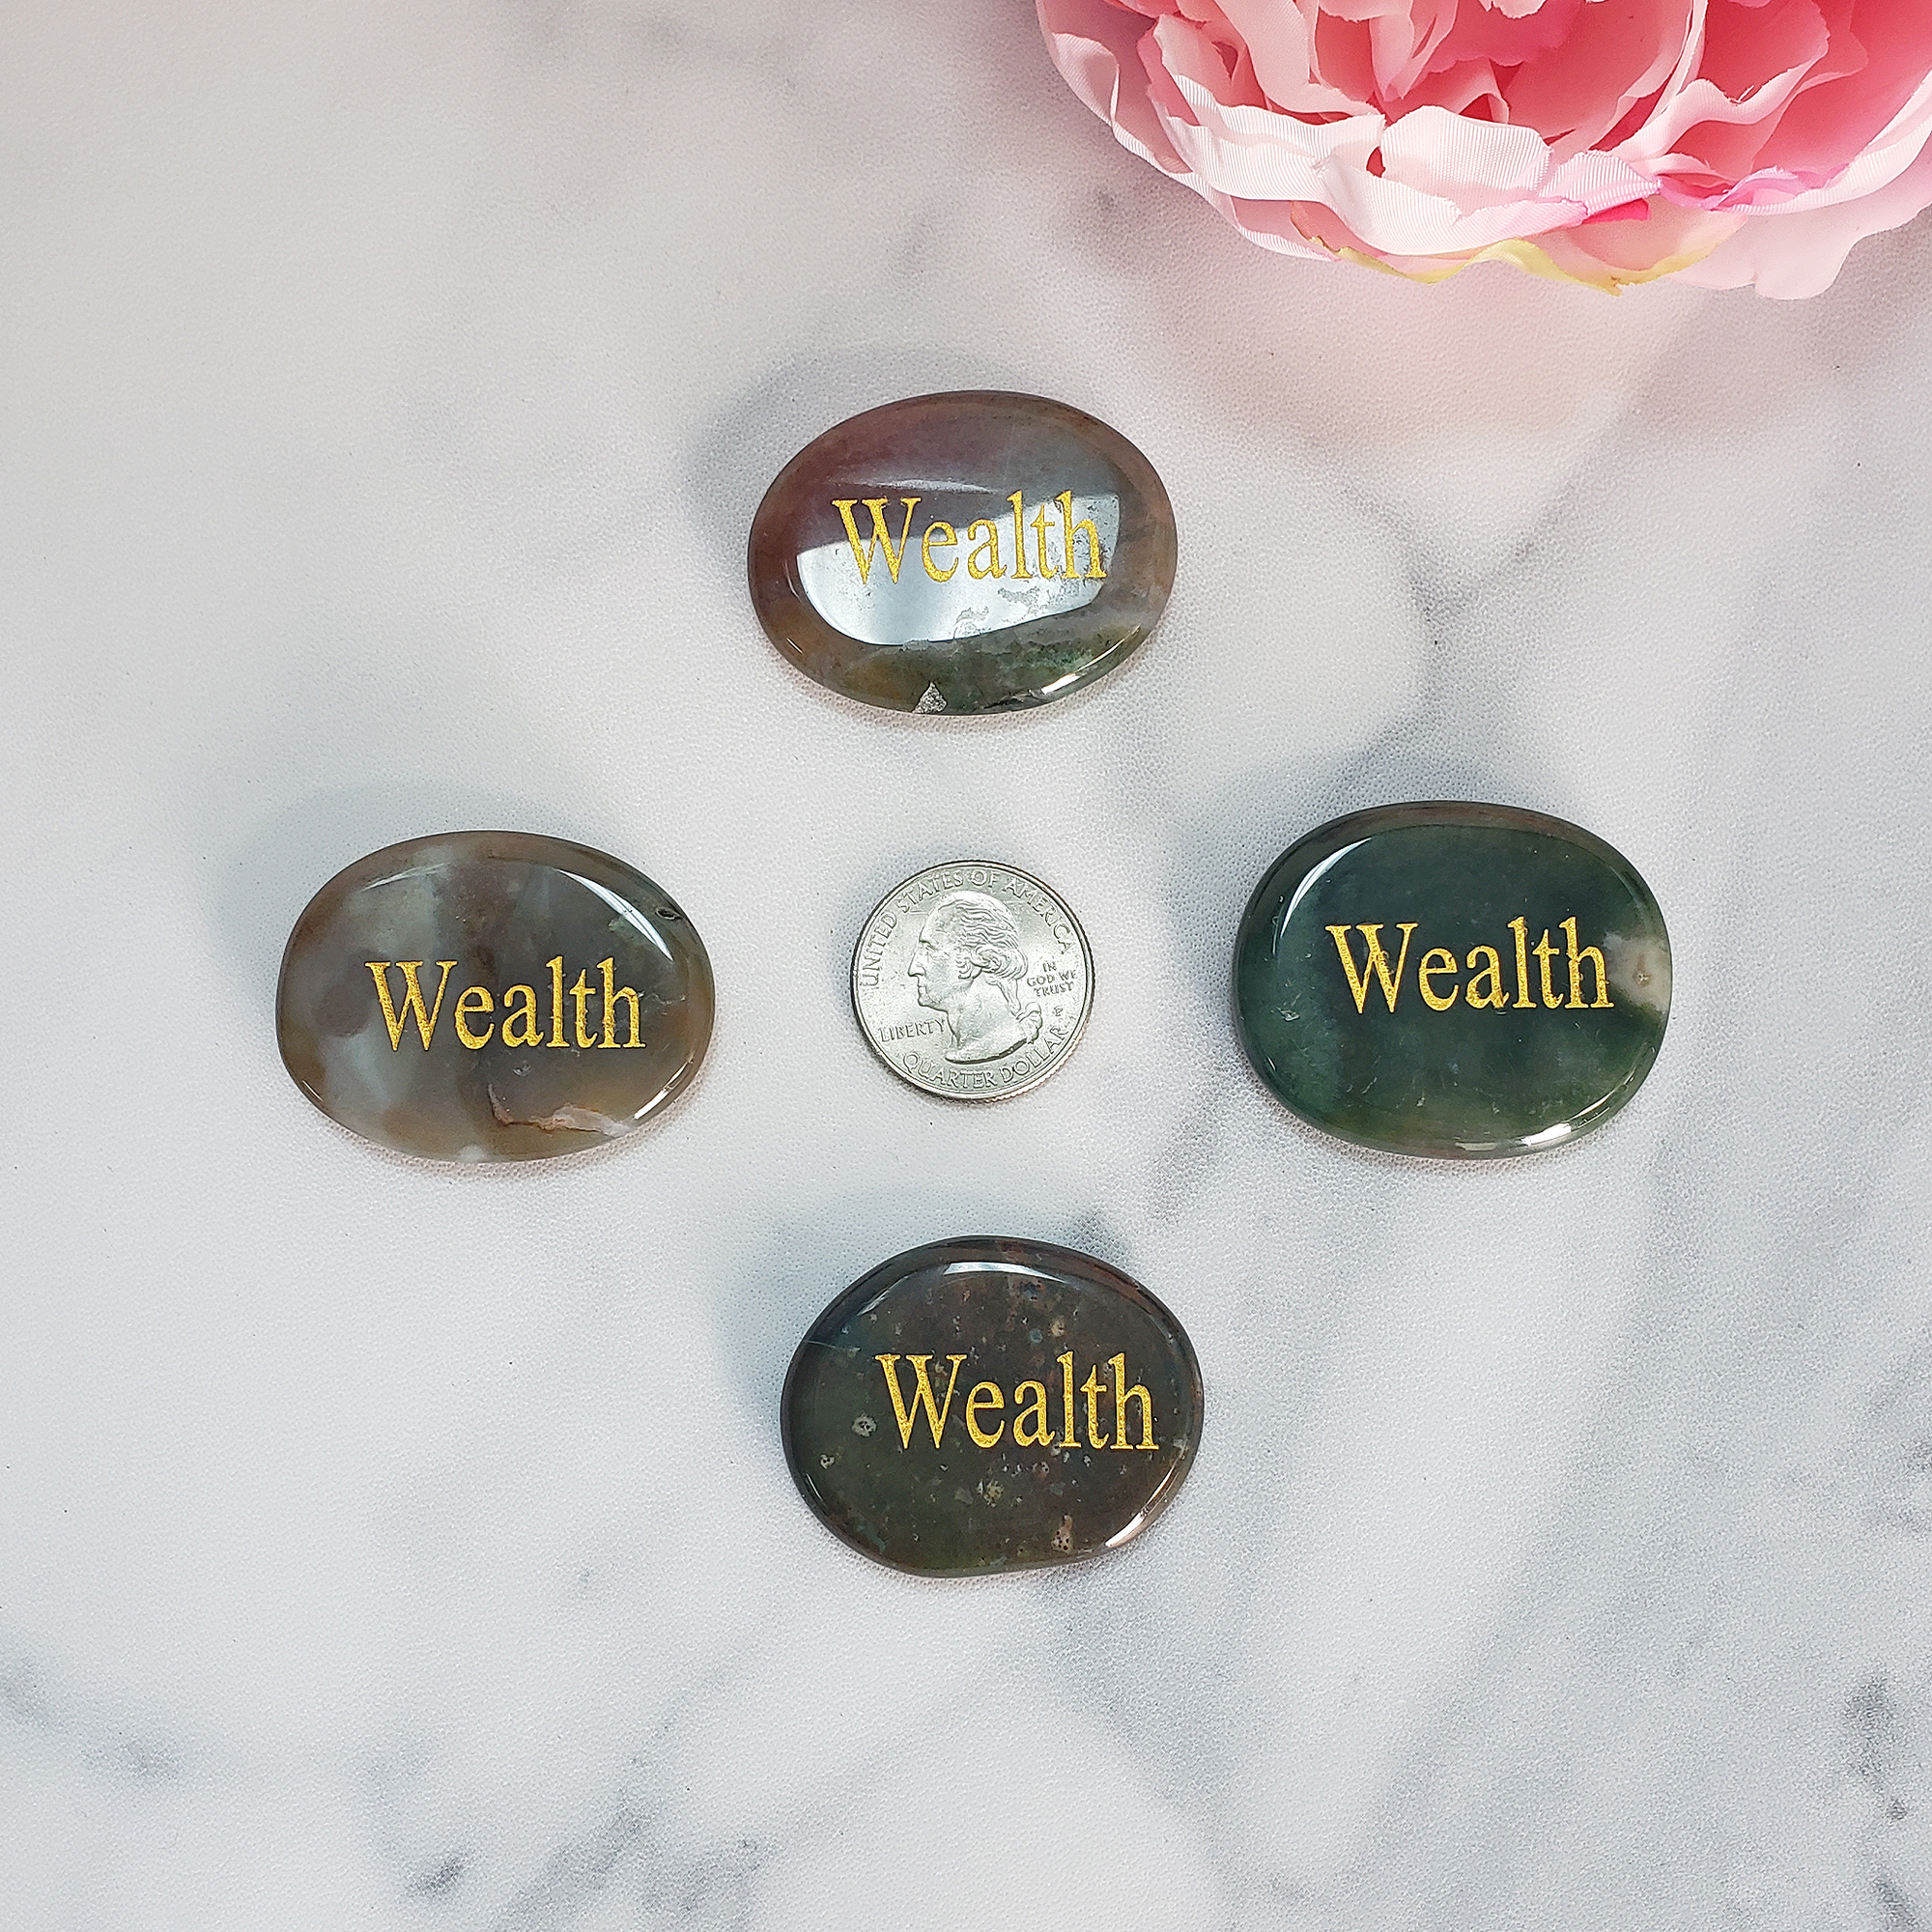 Wealth Affirmation Palm Stone | Crystal Worry Stone with &quot;Wealth&quot; Engraving - Size Comparison